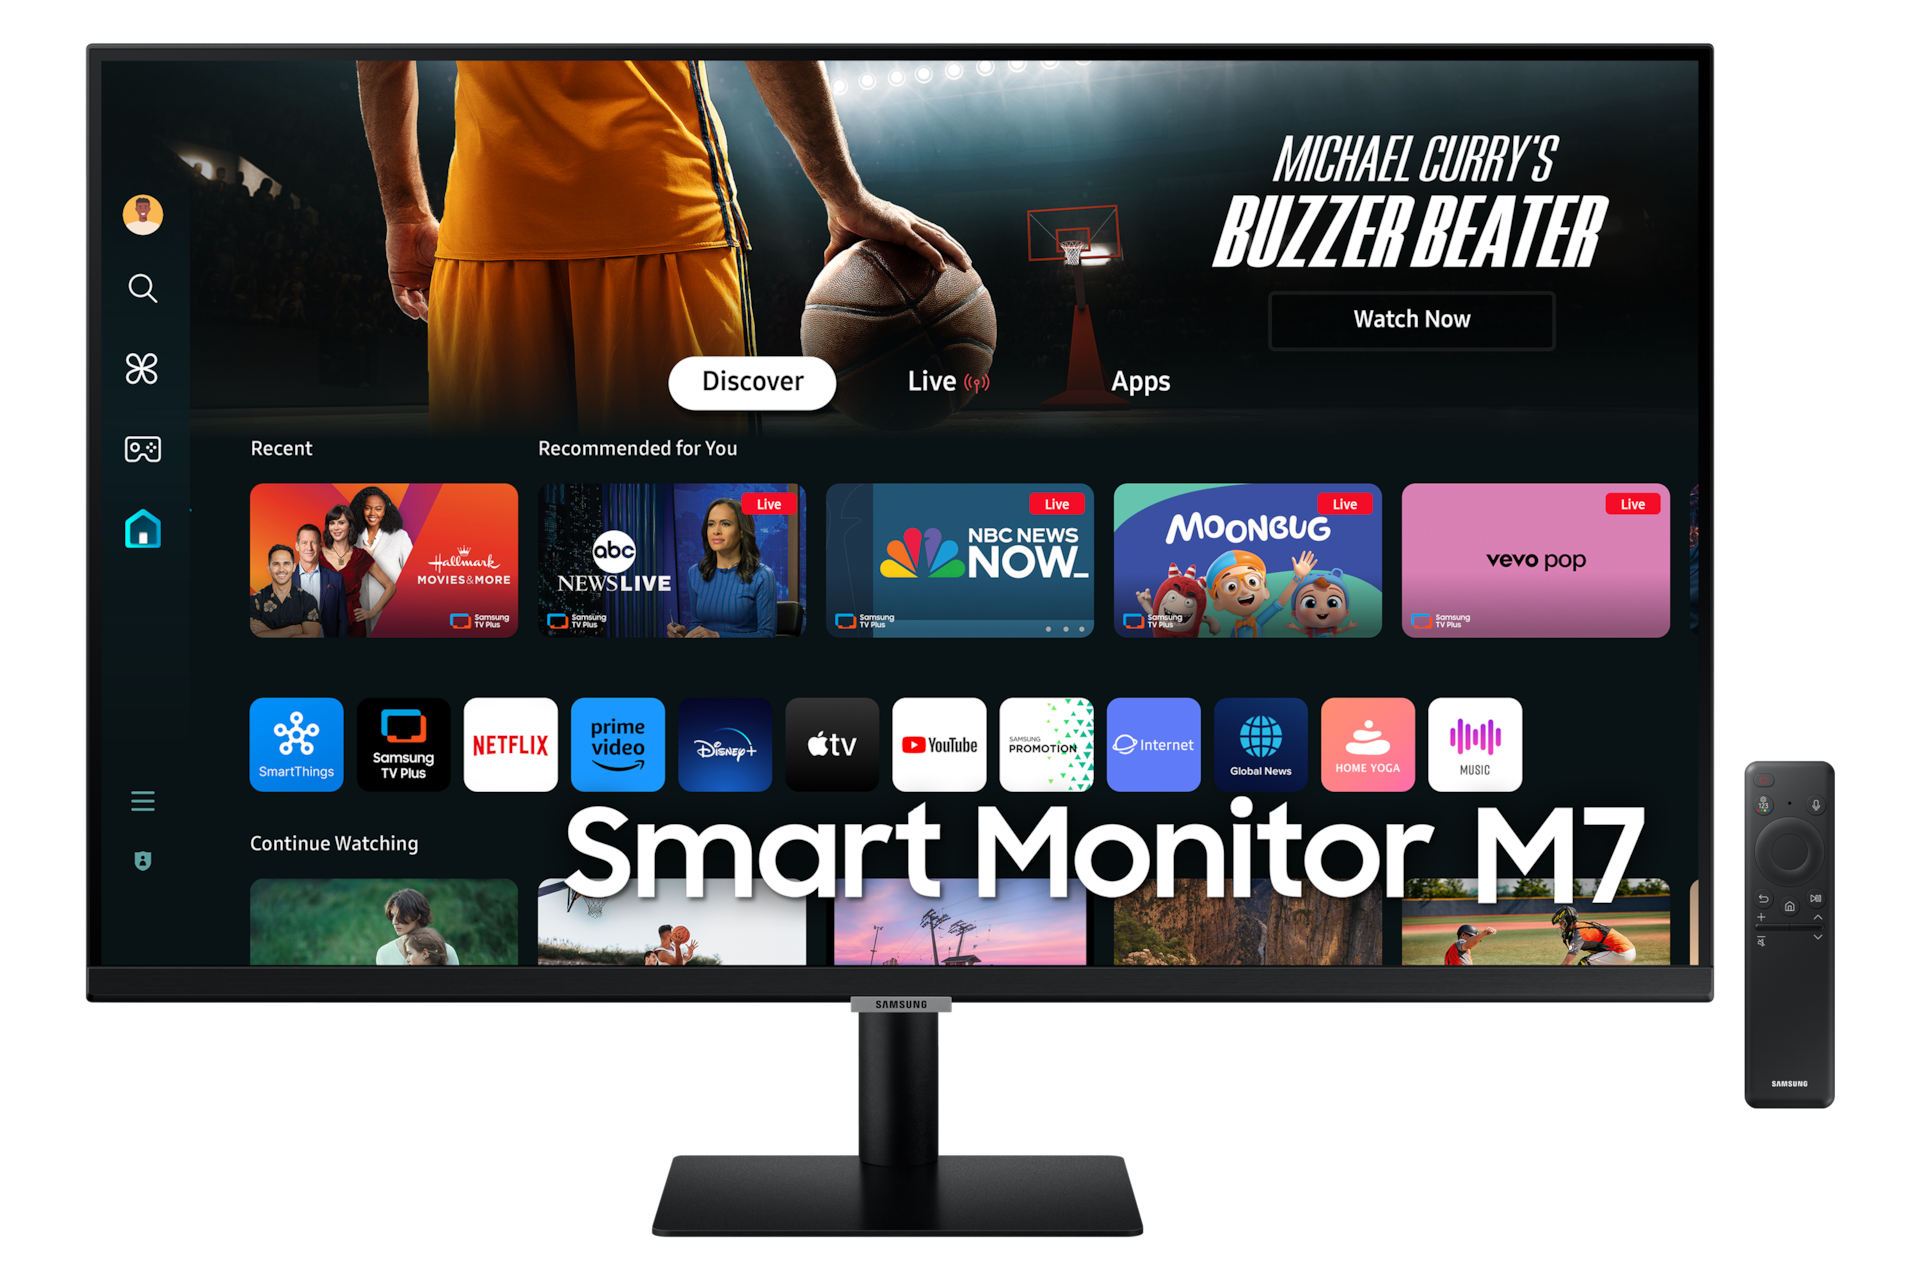 Front of 32inch Samsung Smart Monitor M70D with Smart TV Apps on screen, and remote control.